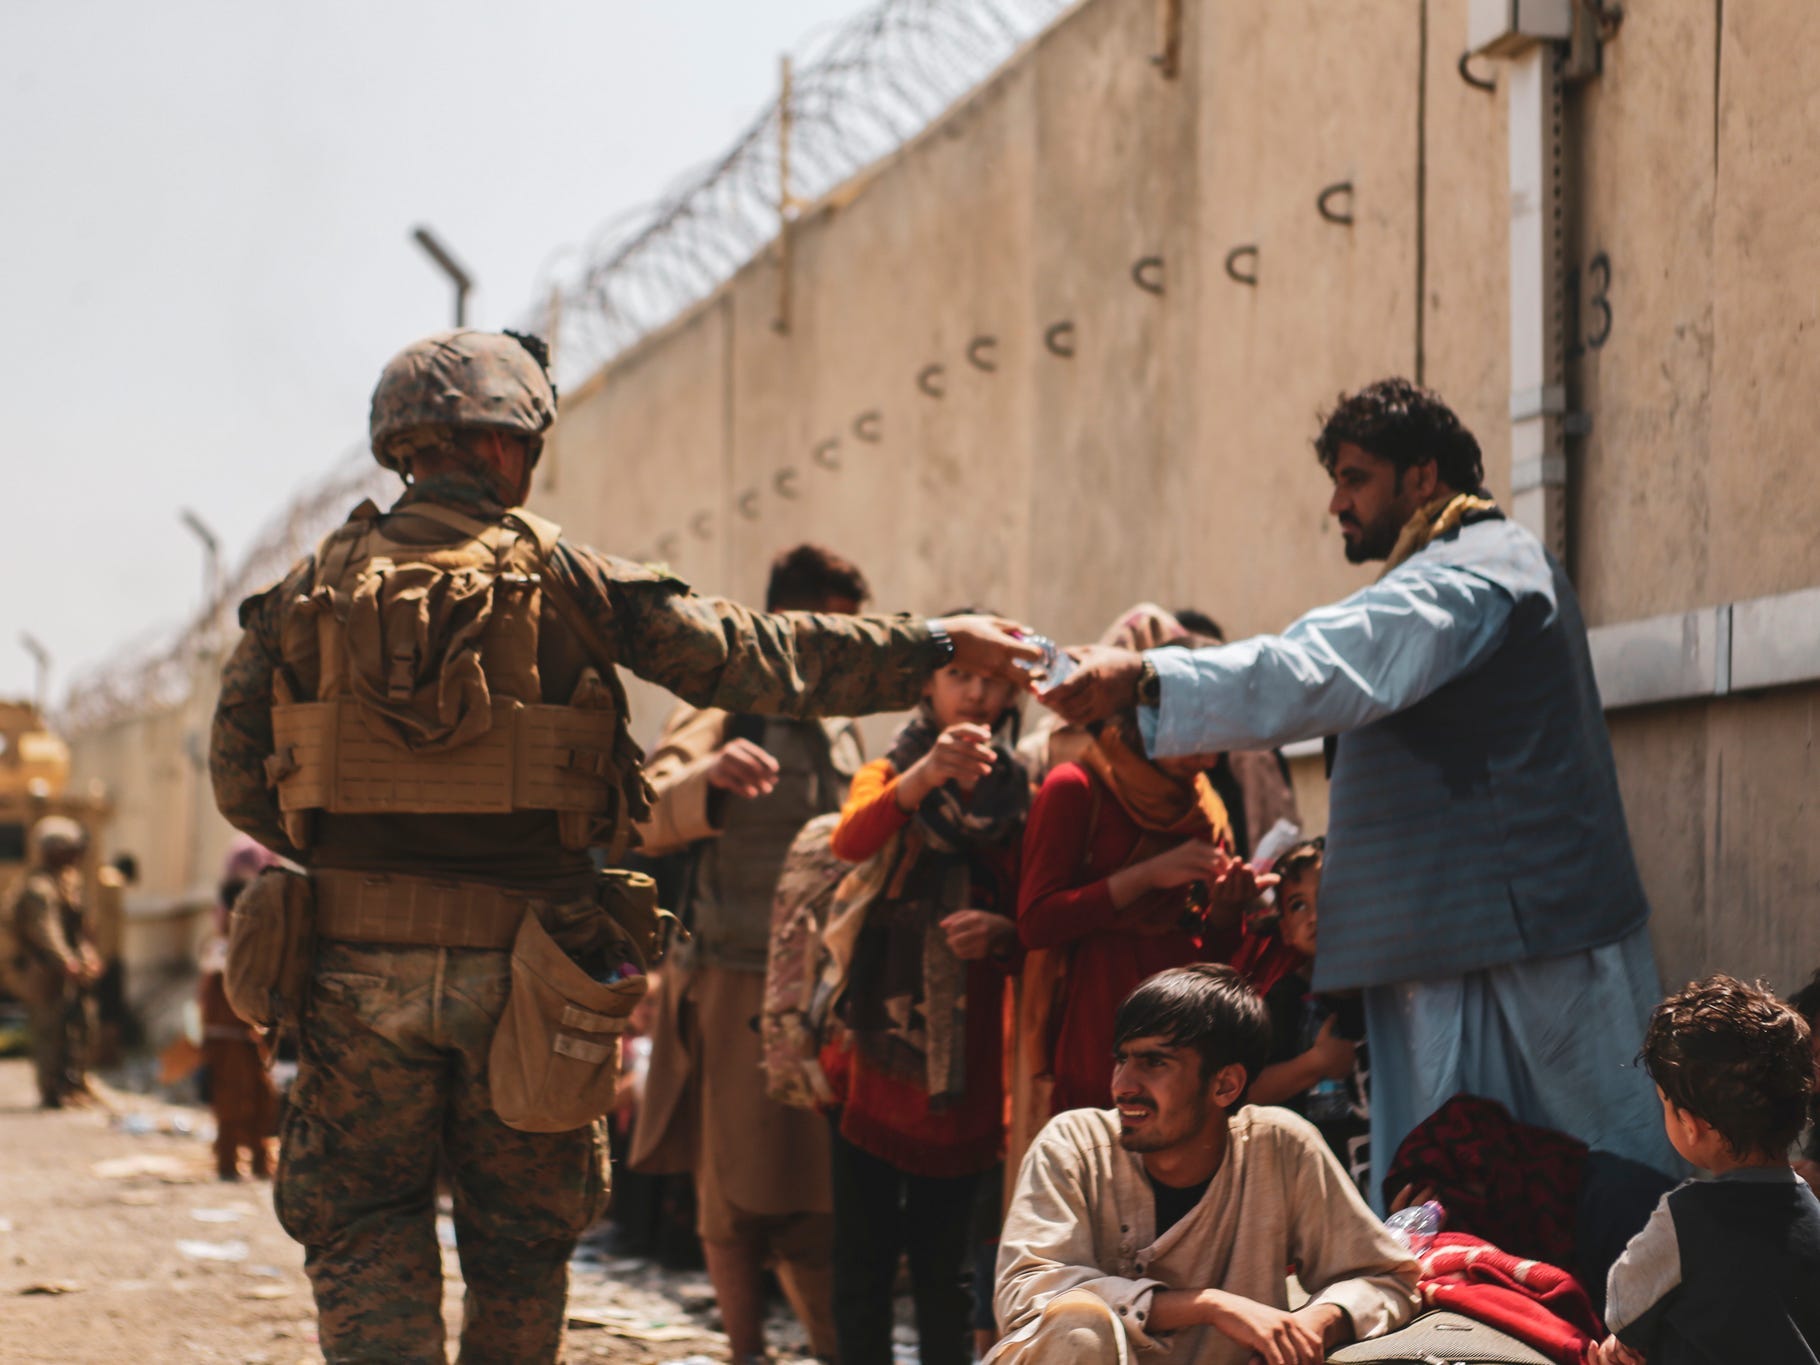 This handout image shows A Marine with the 24th Marine Expeditionary unit (MEU) passes out water to evacuees during an evacuation at Hamid Karzai International Airport, Kabul, Afghanistan, August 22.